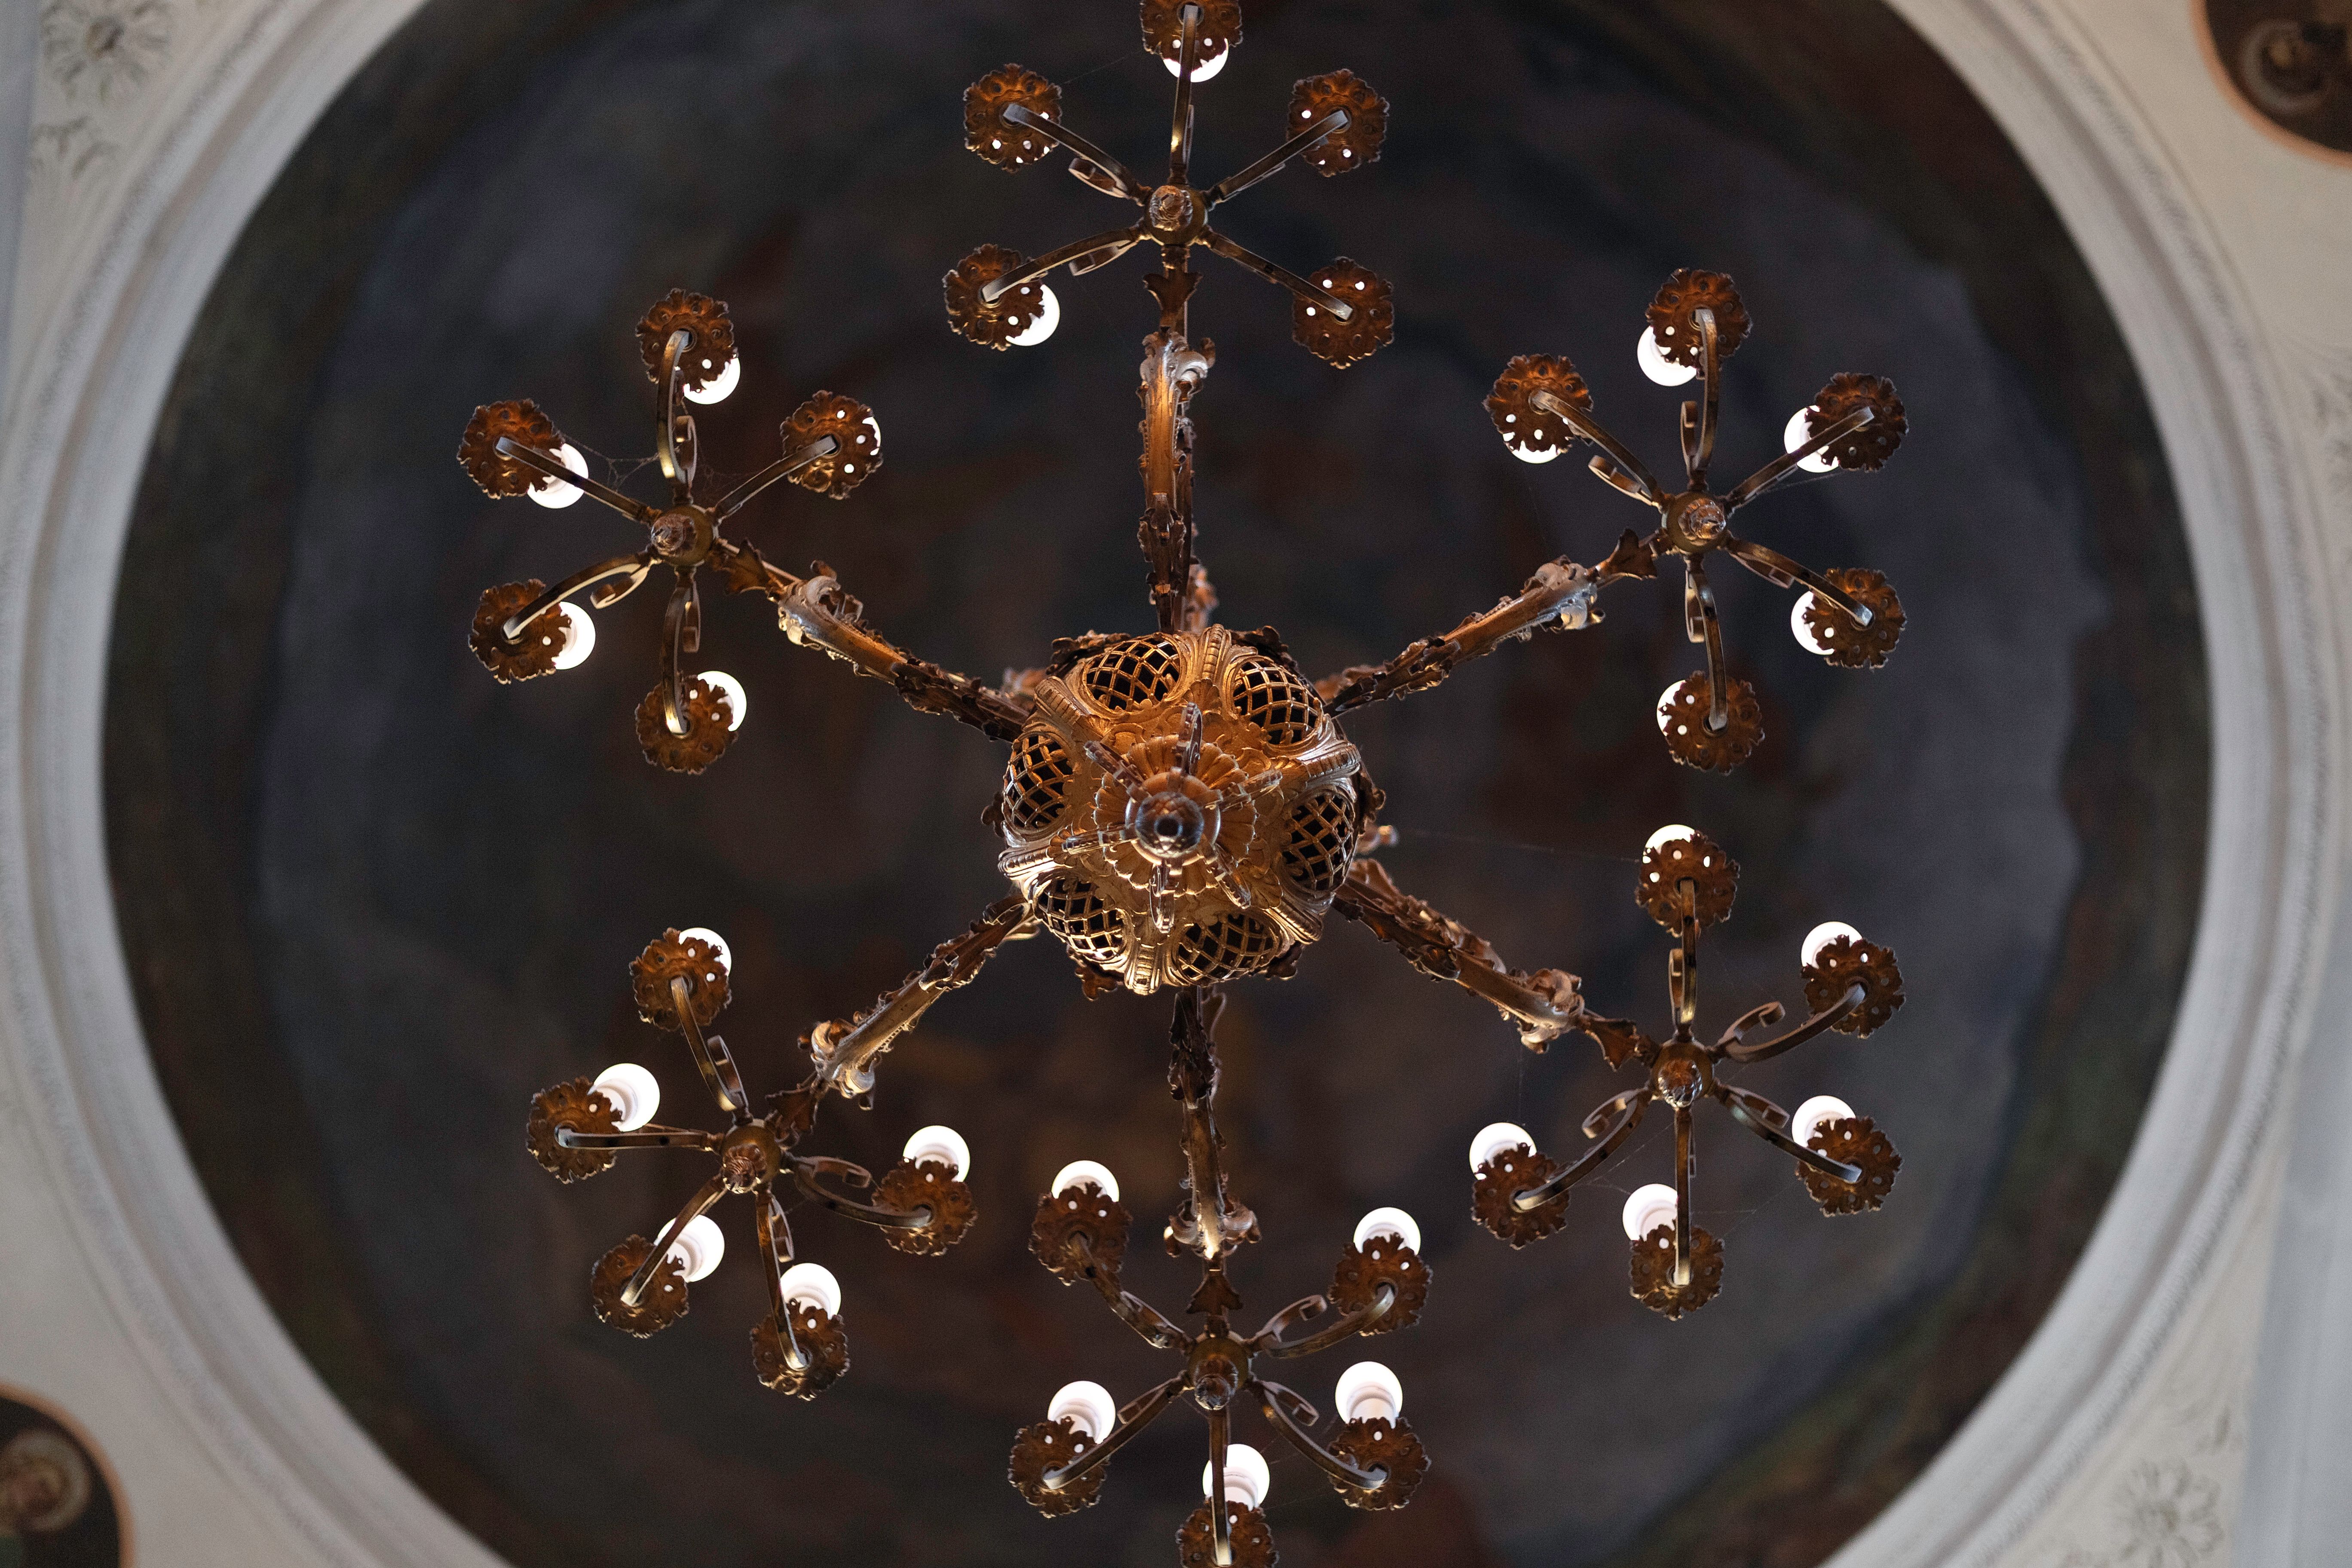 A fragment of the chandelier, the 1880s–1890s, the church of the Holy Cross (Carmelitian) in Kaunas. Photo by Povilas Jarmala, 2019